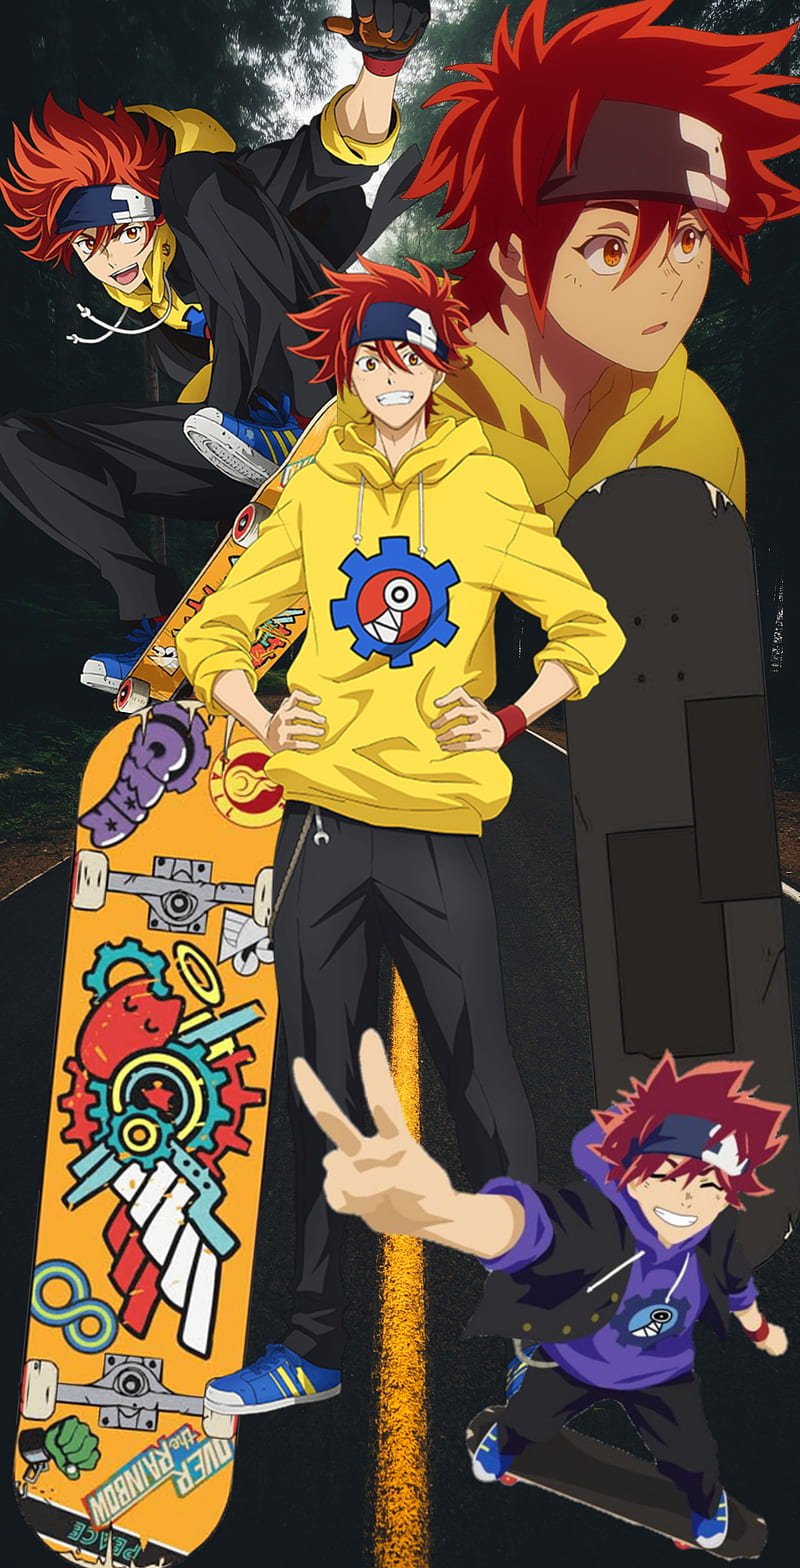 Anime Review: Sk8 the Infinity Episode 1 - Sequential Planet